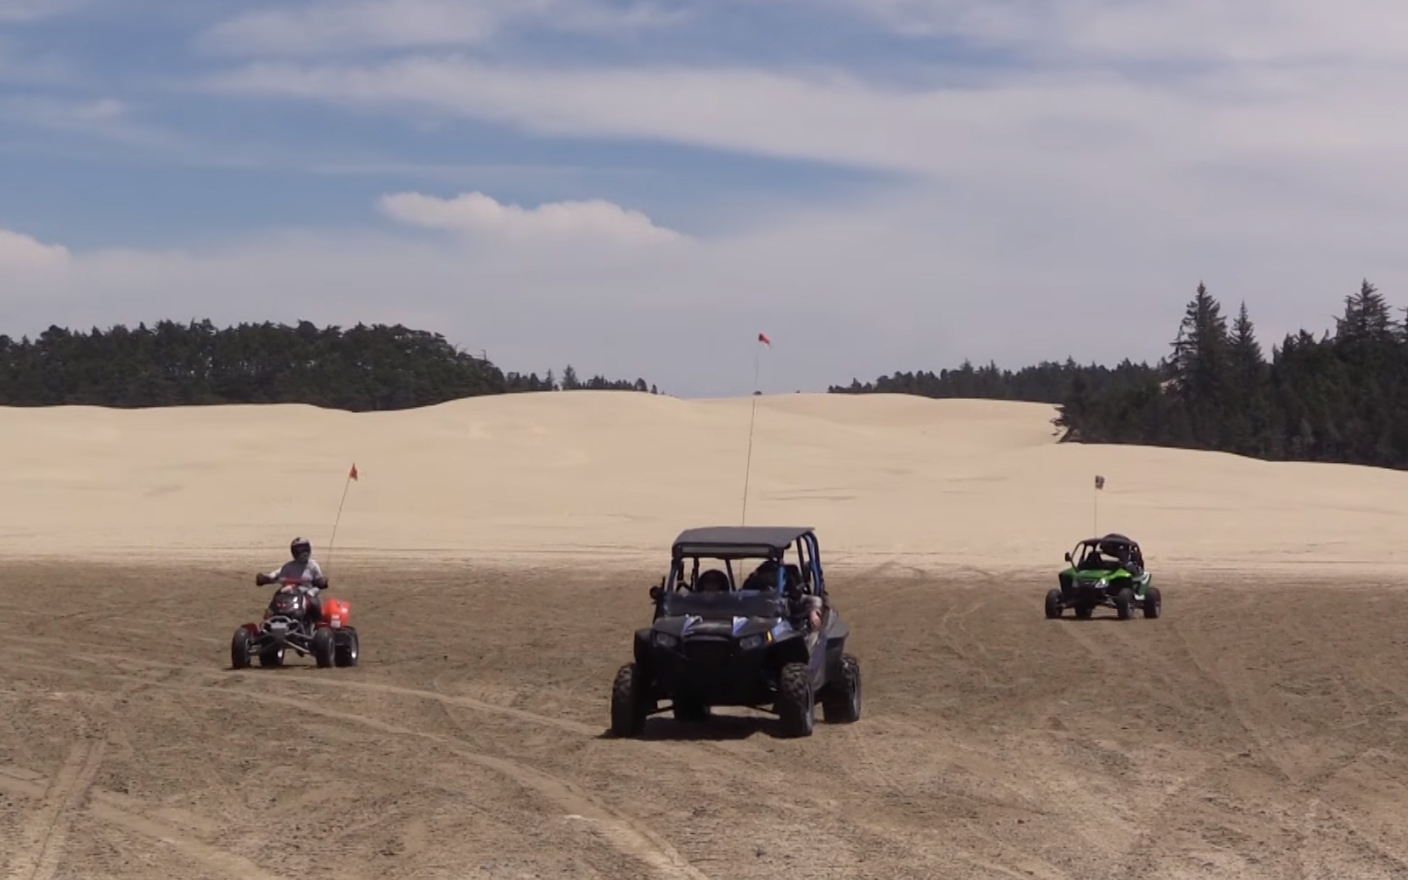 Three Off Road Vehicles on the Sand